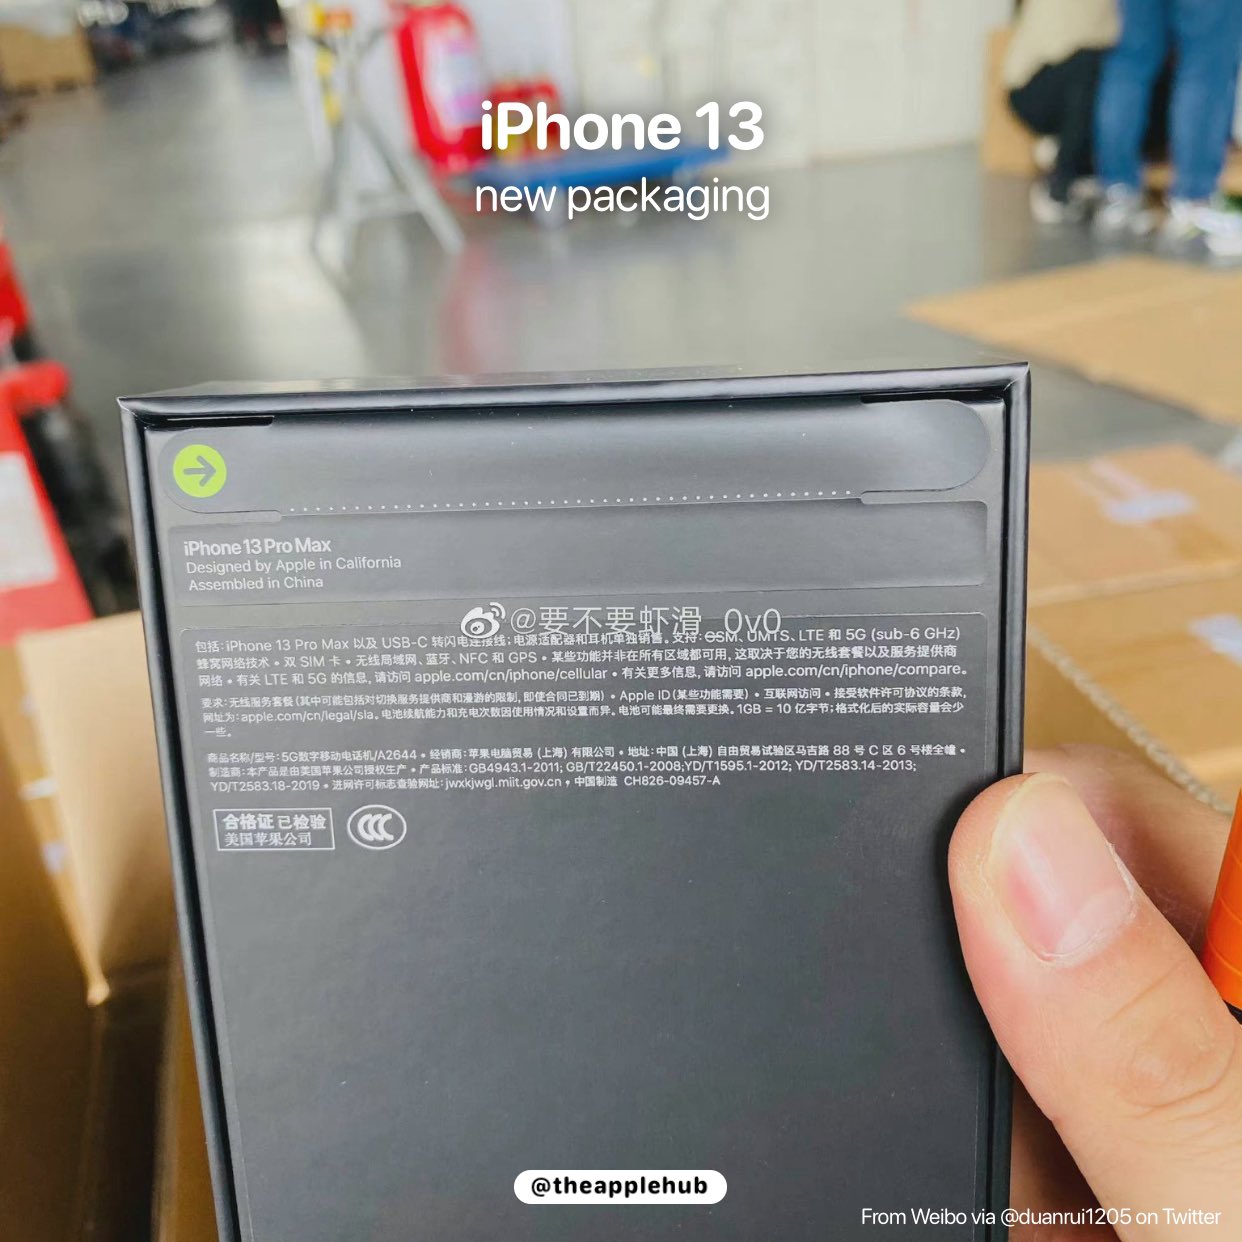 Apple Hub Apple Has Redesigned The Packing For The Iphone 13 Series To Eliminate The Plastic Wrap On The Box This Change Would Avoid Creating 600 Metric Tons Of Plastic